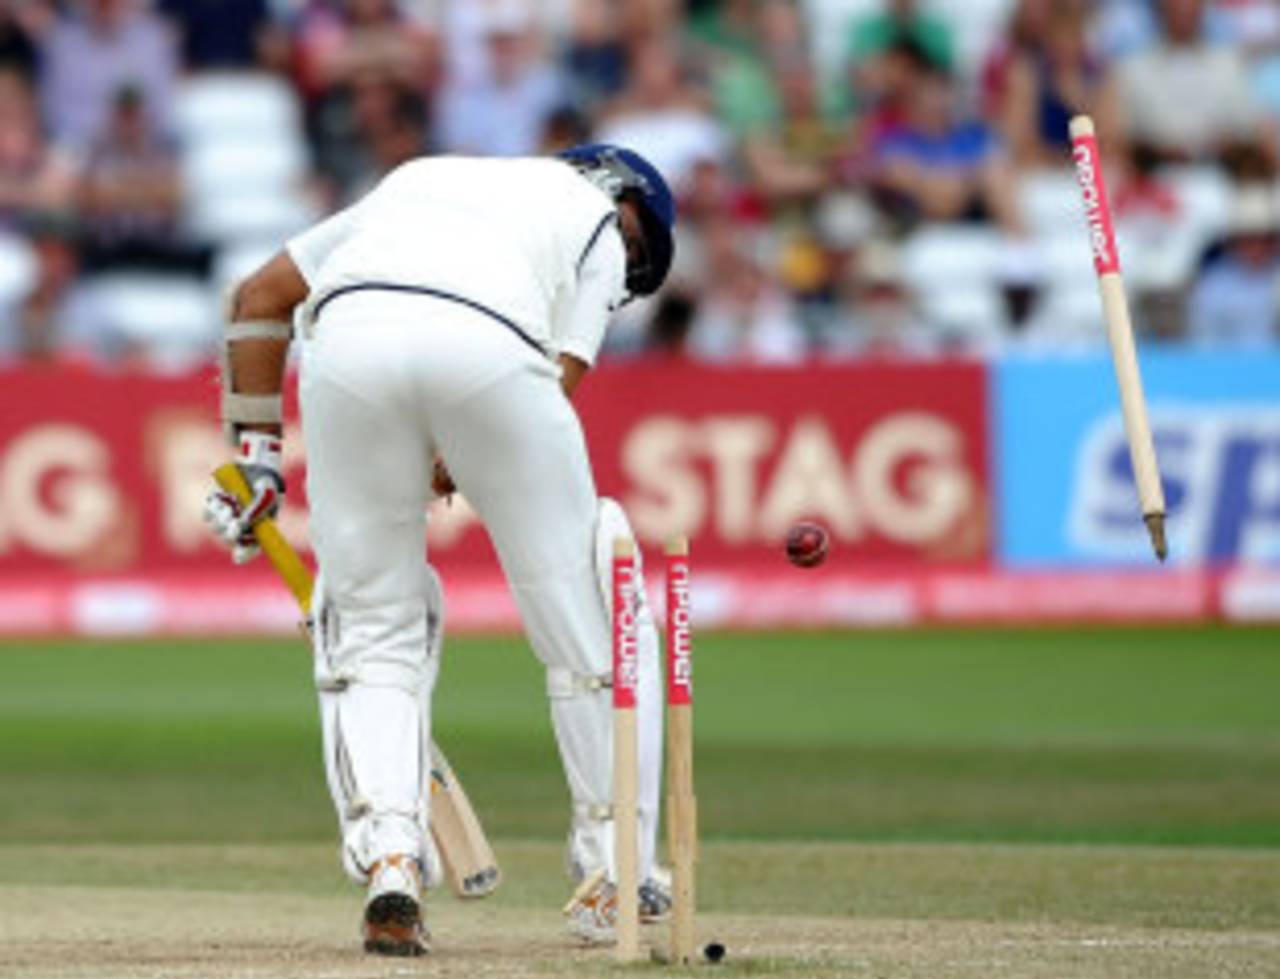 VVS Laxman looks back to see his stumps cart-wheeling, England v India, 2nd Test, Trent Bridge, 4th day, August 1, 2011